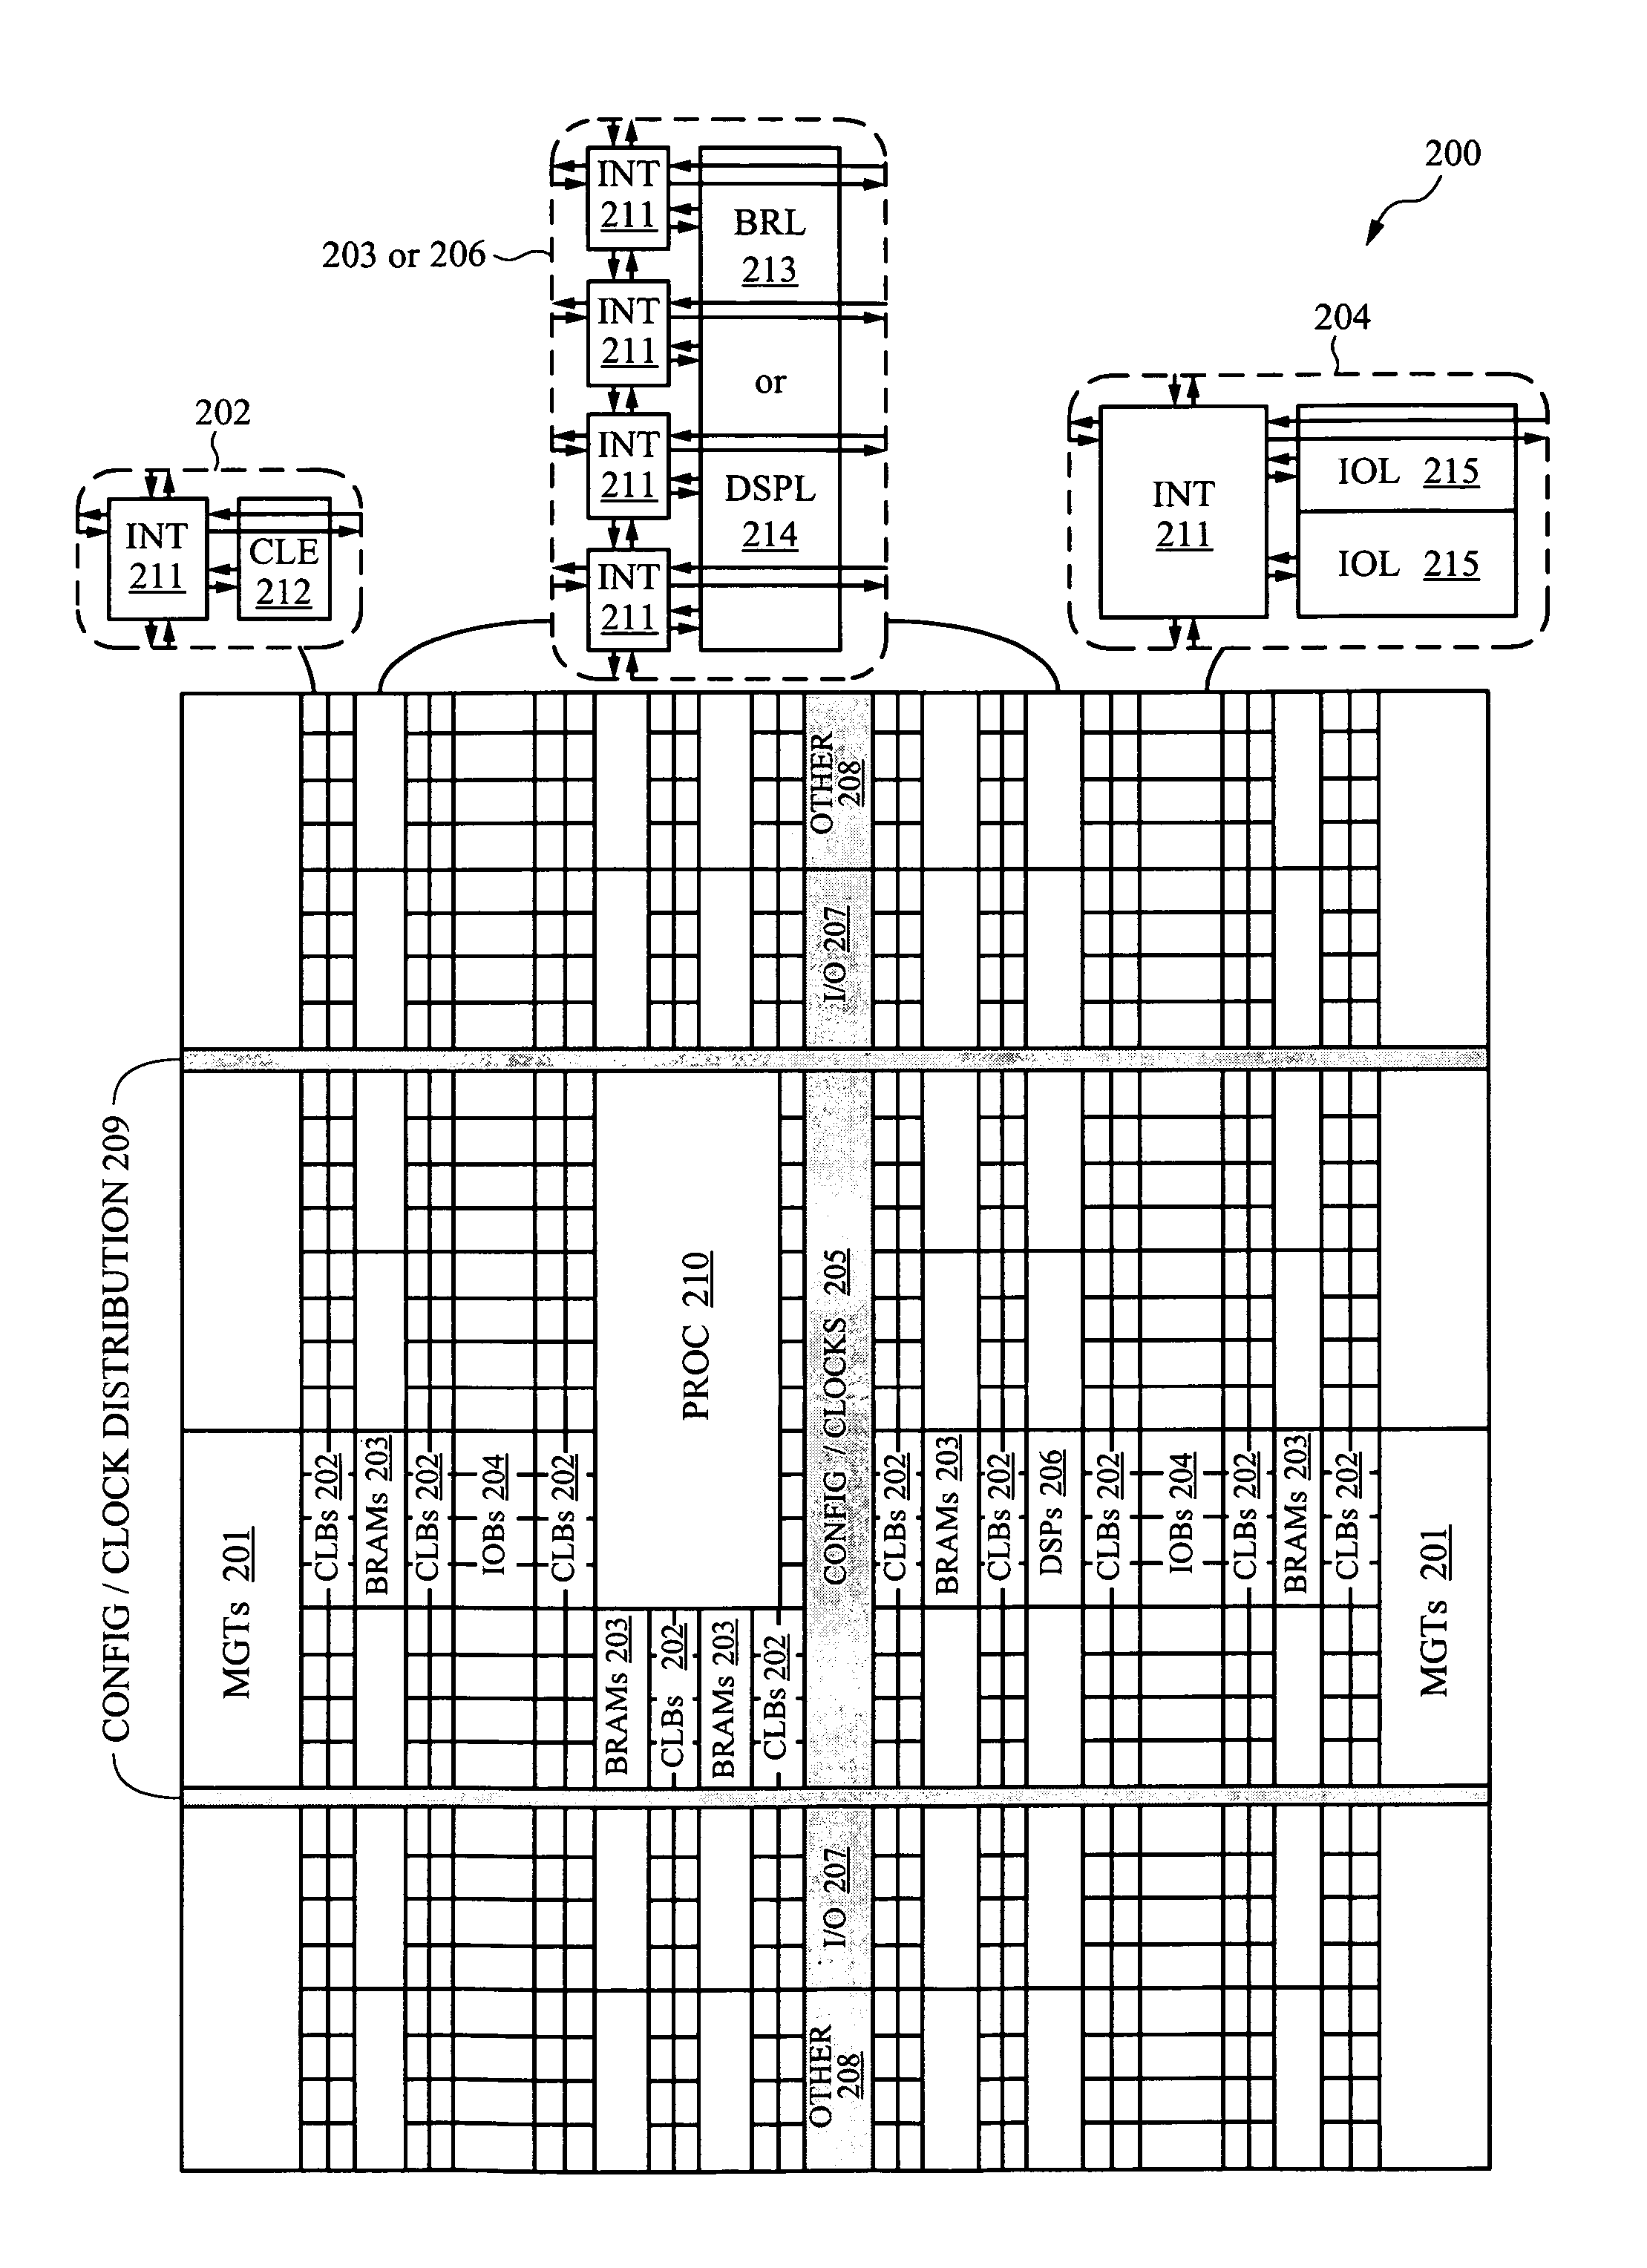 Interleaved memory cell with single-event-upset tolerance